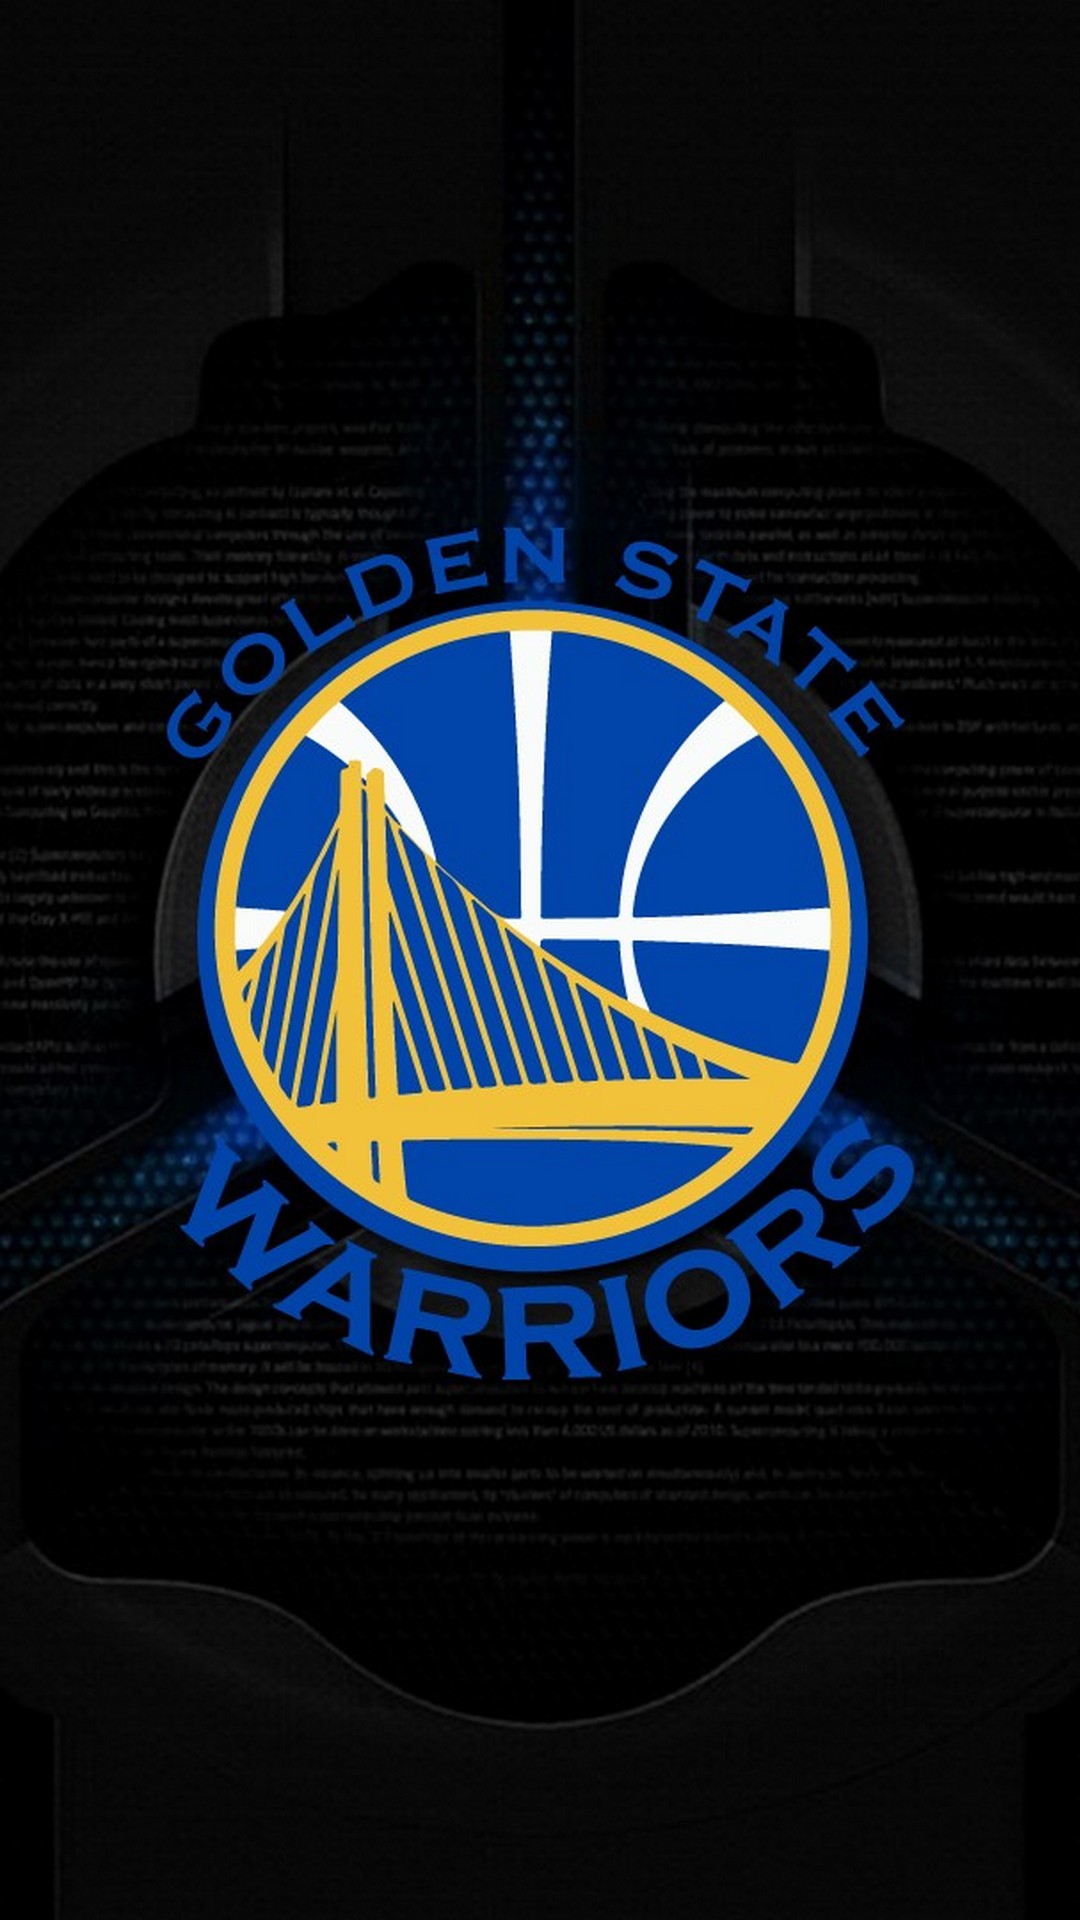 Wallpaper Golden State Mobile with image dimensions 1080x1920 pixel. You can make this wallpaper for your Desktop Computer Backgrounds, Windows or Mac Screensavers, iPhone Lock screen, Tablet or Android and another Mobile Phone device